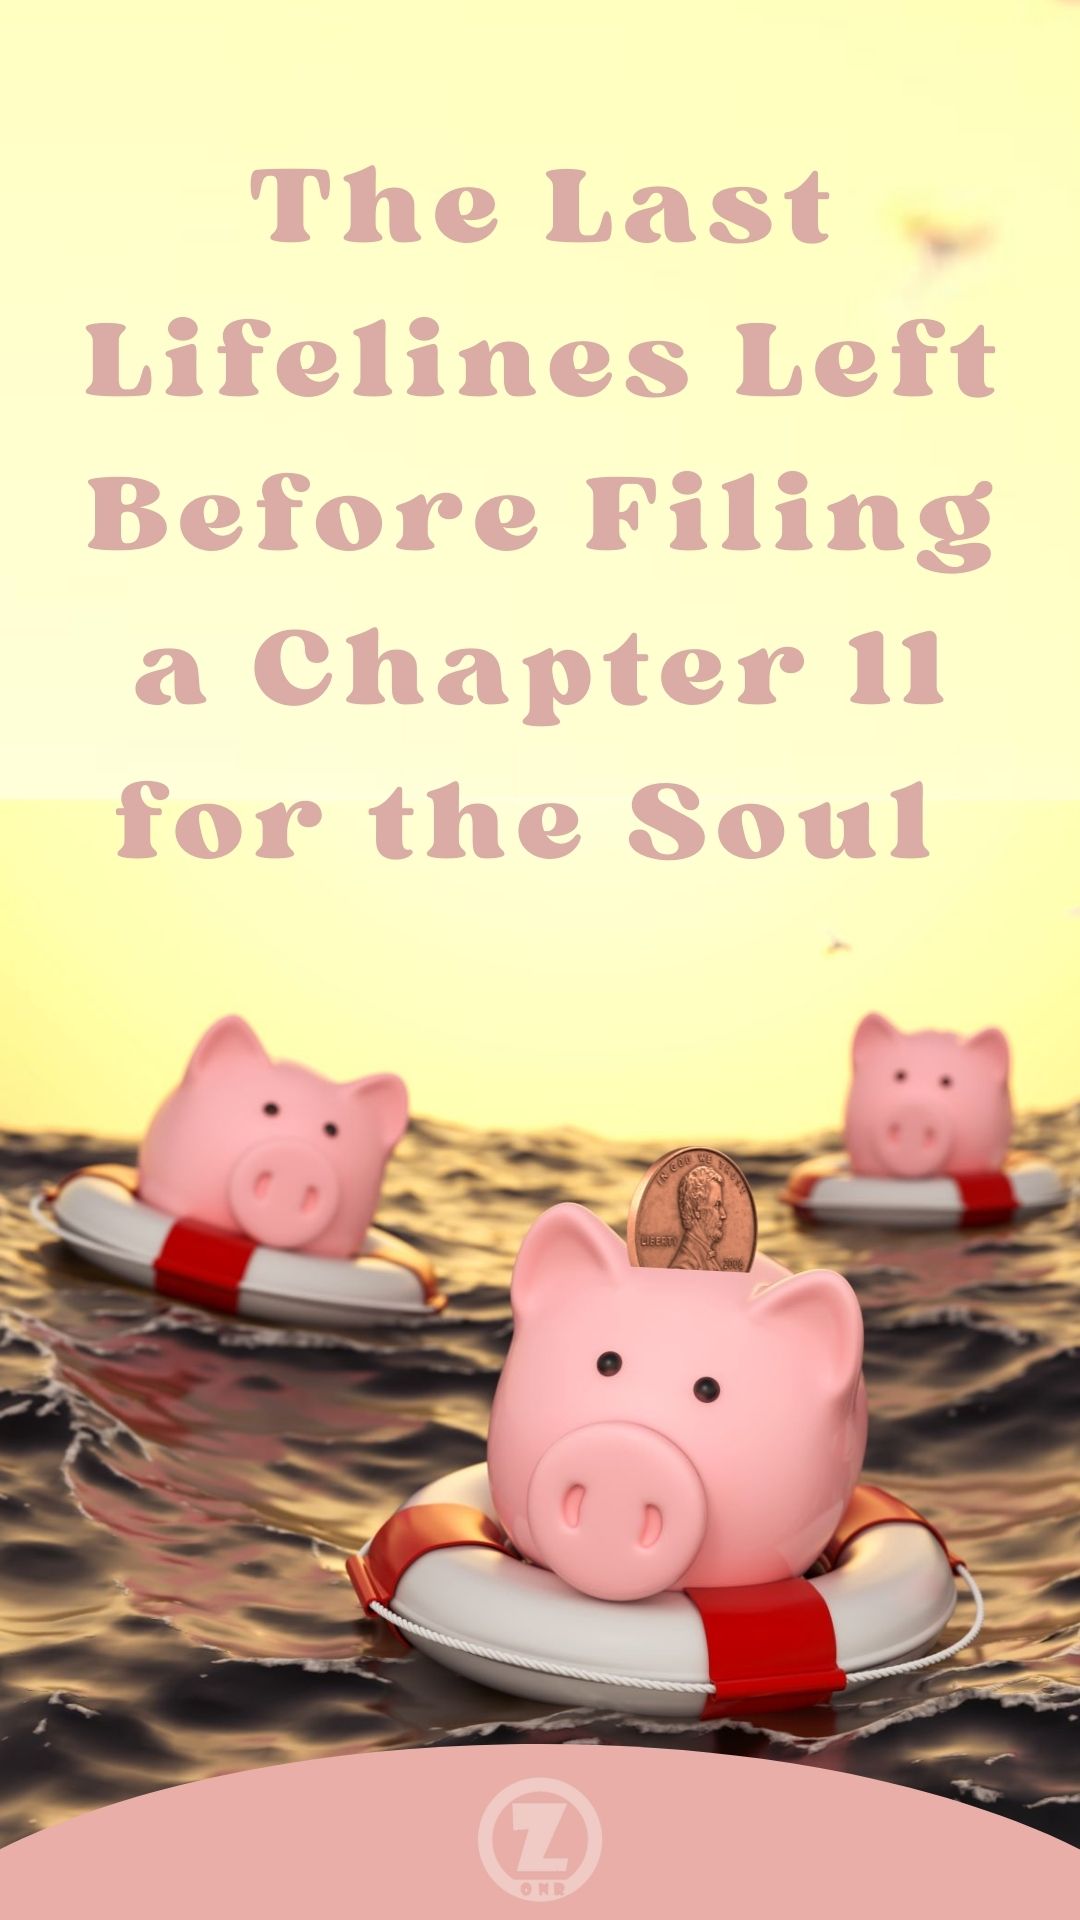 The Last Lifelines Left Before Filing a Chapter 11 for the Soul – Step 12